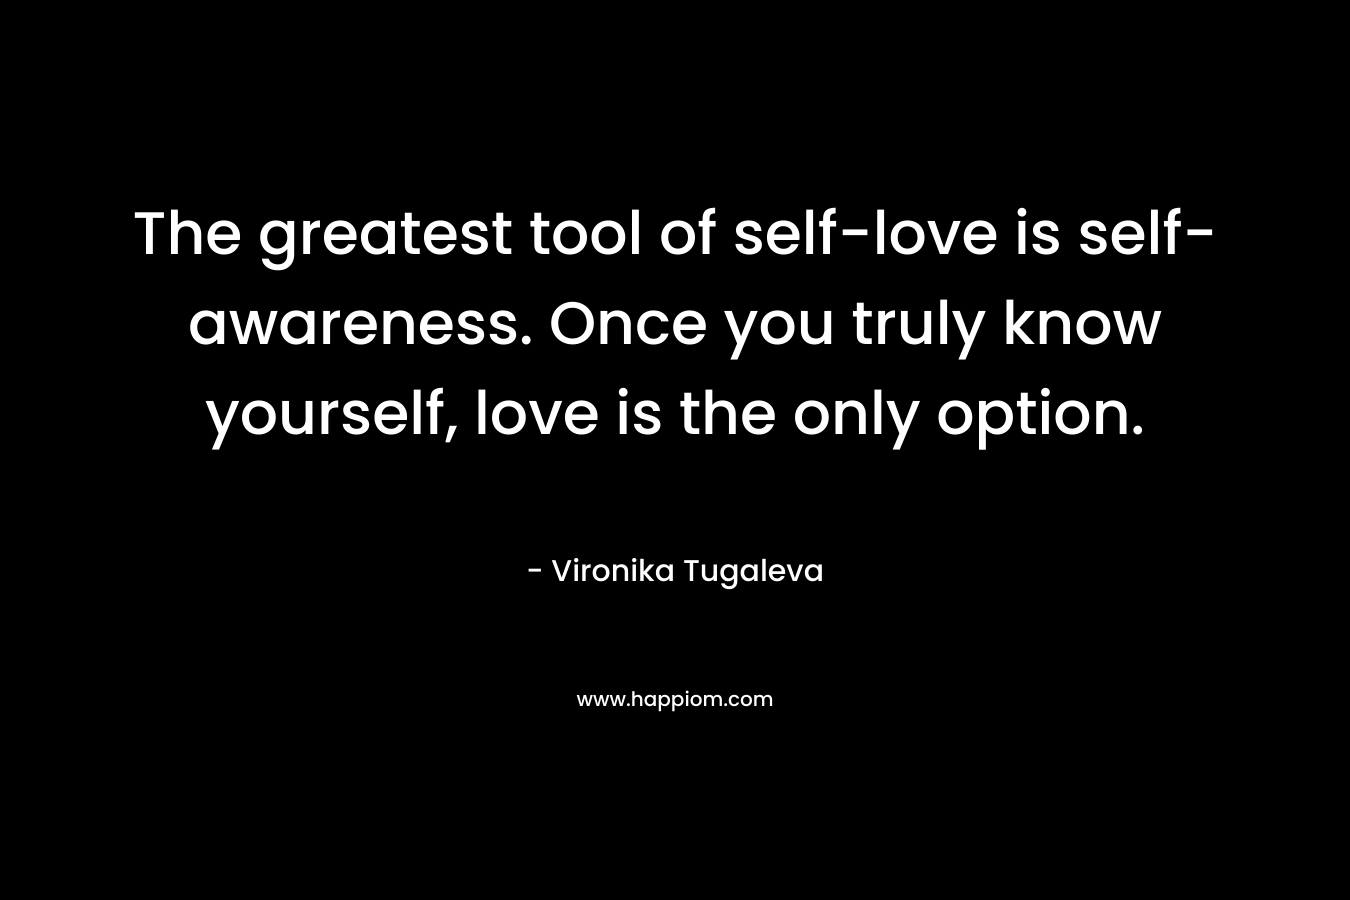 The greatest tool of self-love is self-awareness. Once you truly know yourself, love is the only option.